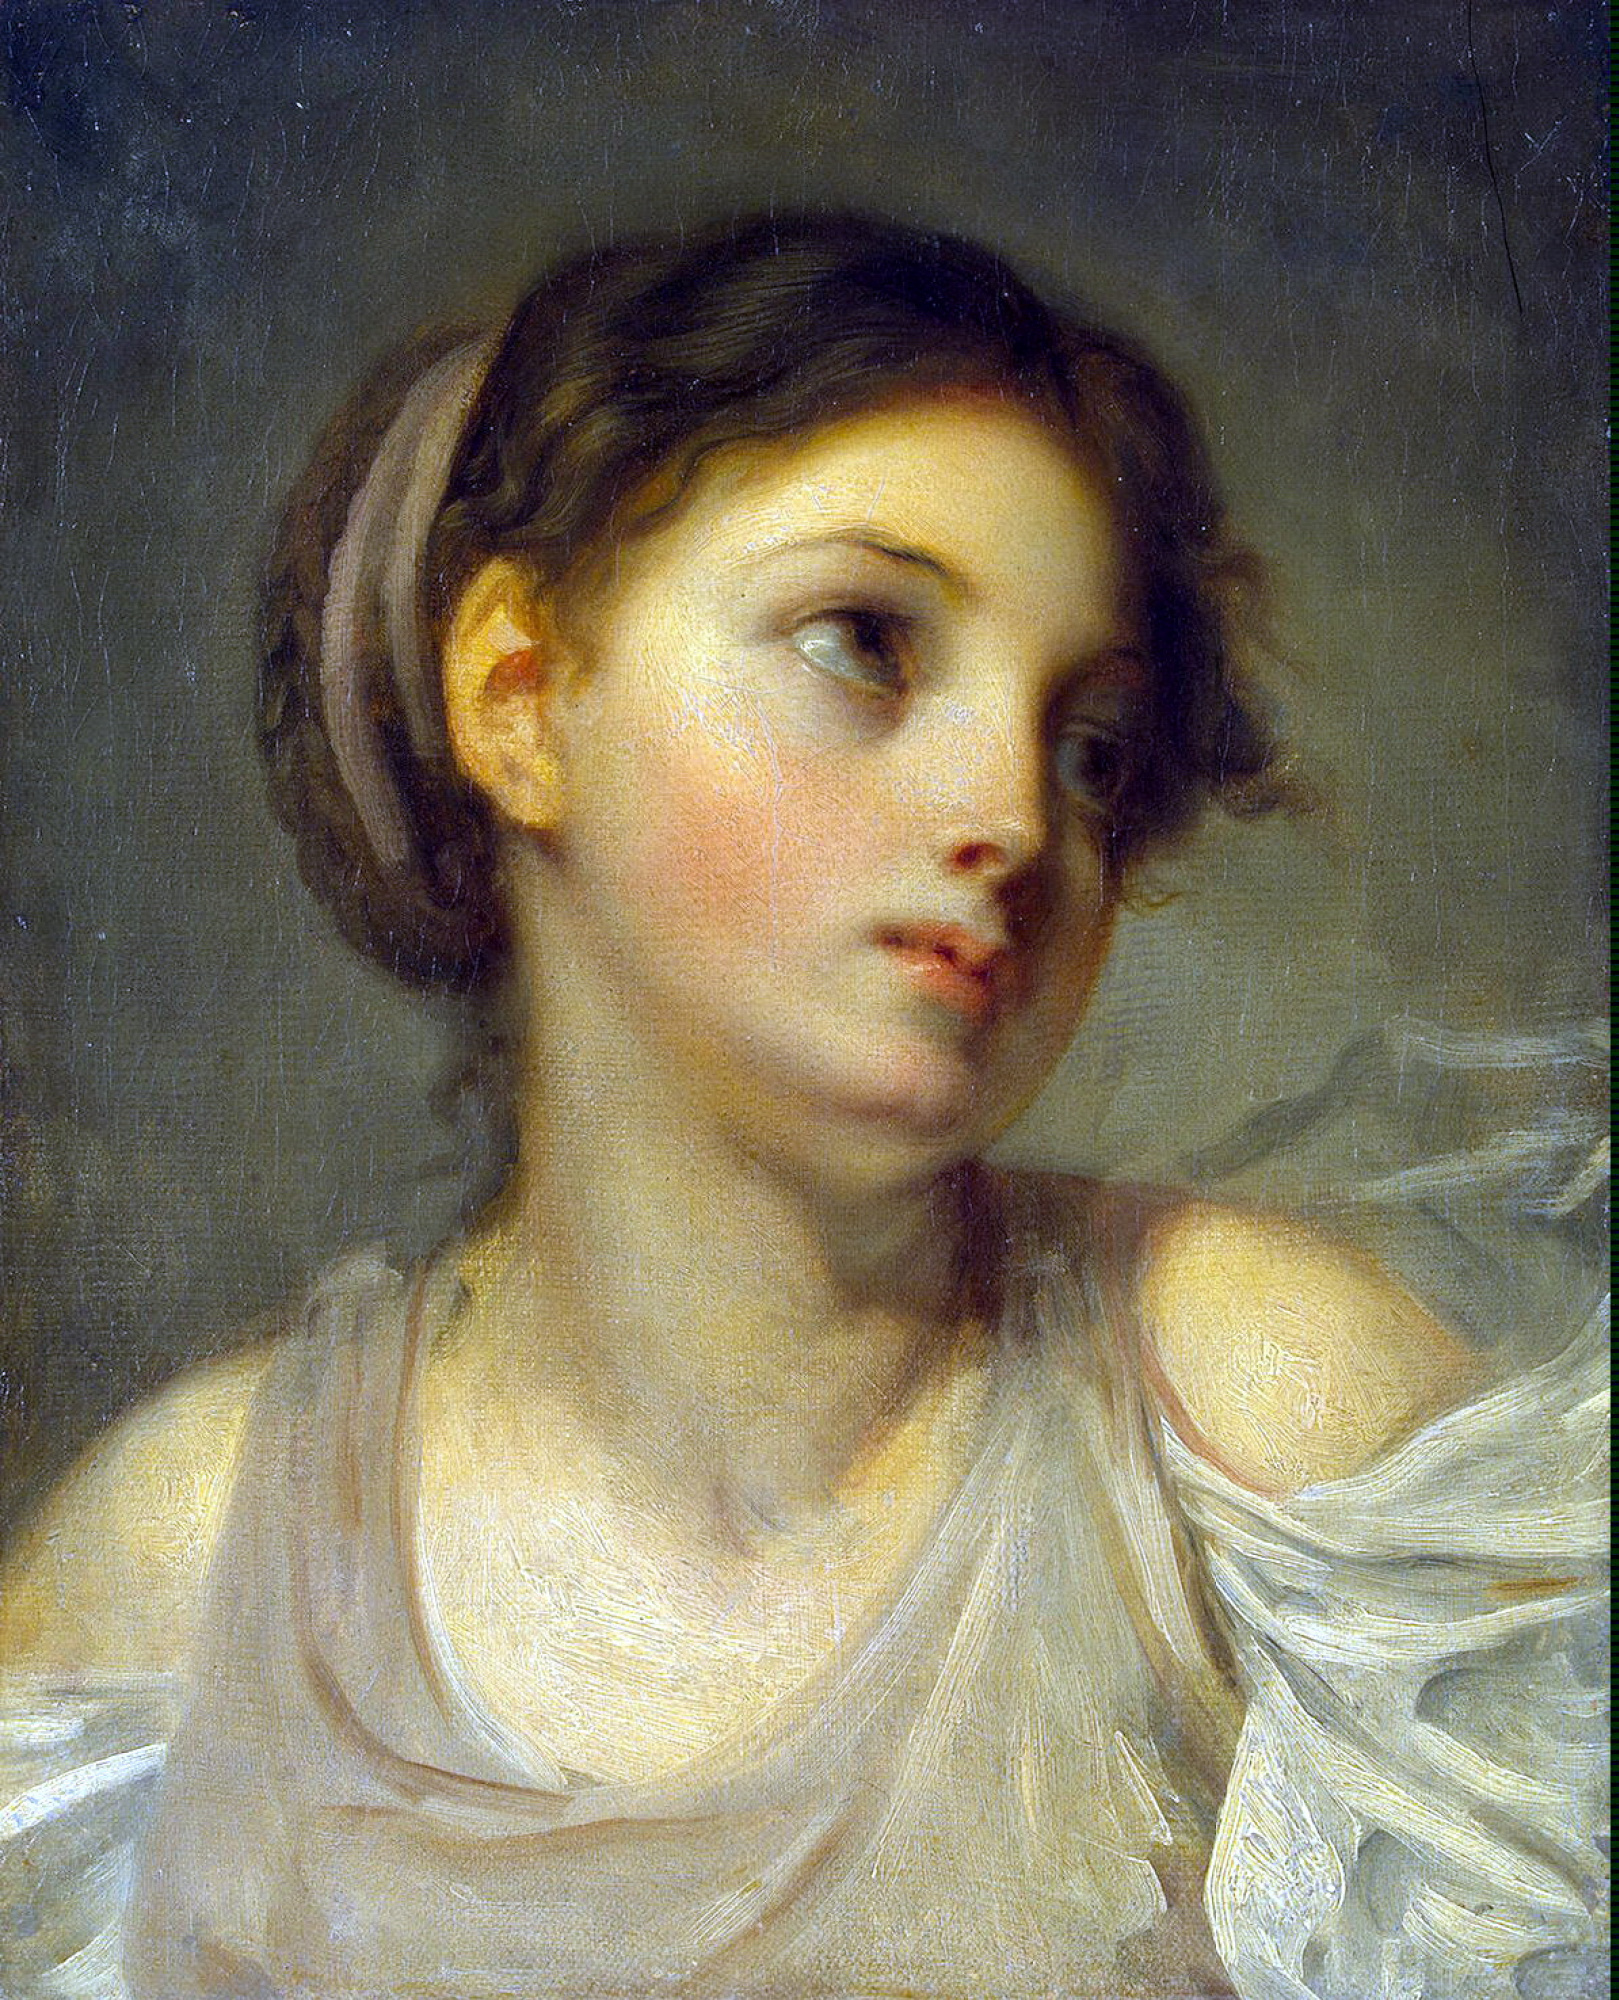 Girl in a lilac tunic by Jean-Baptiste Greuze: History, Analysis